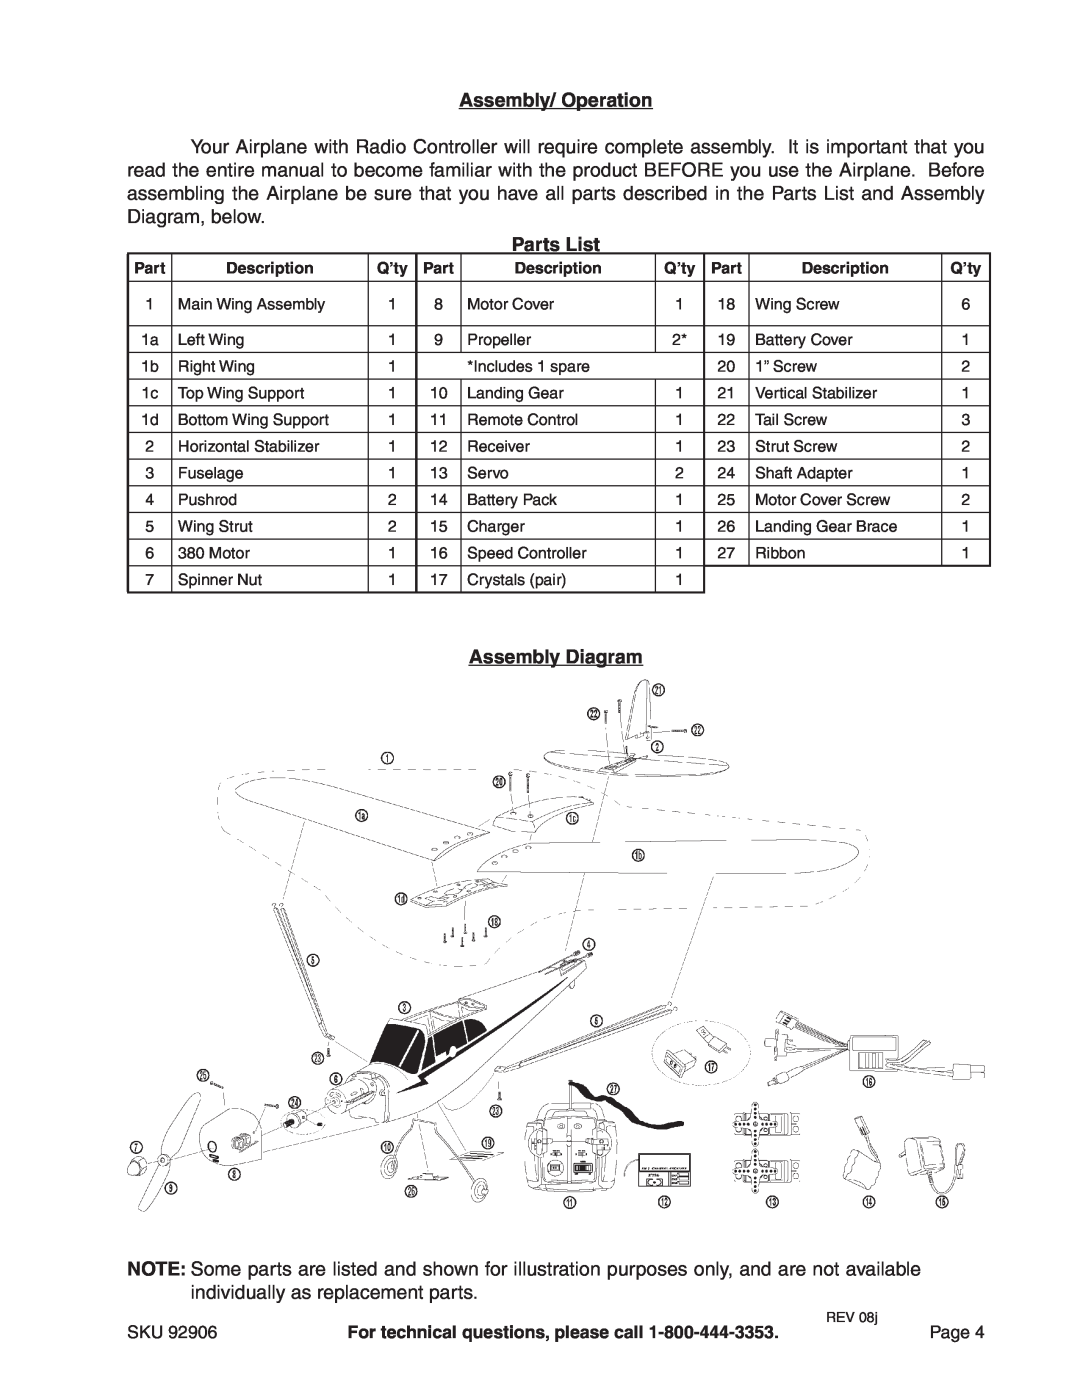 Harbor Freight Tools 92906 operating instructions Assembly/ Operation, Parts List, Assembly Diagram 